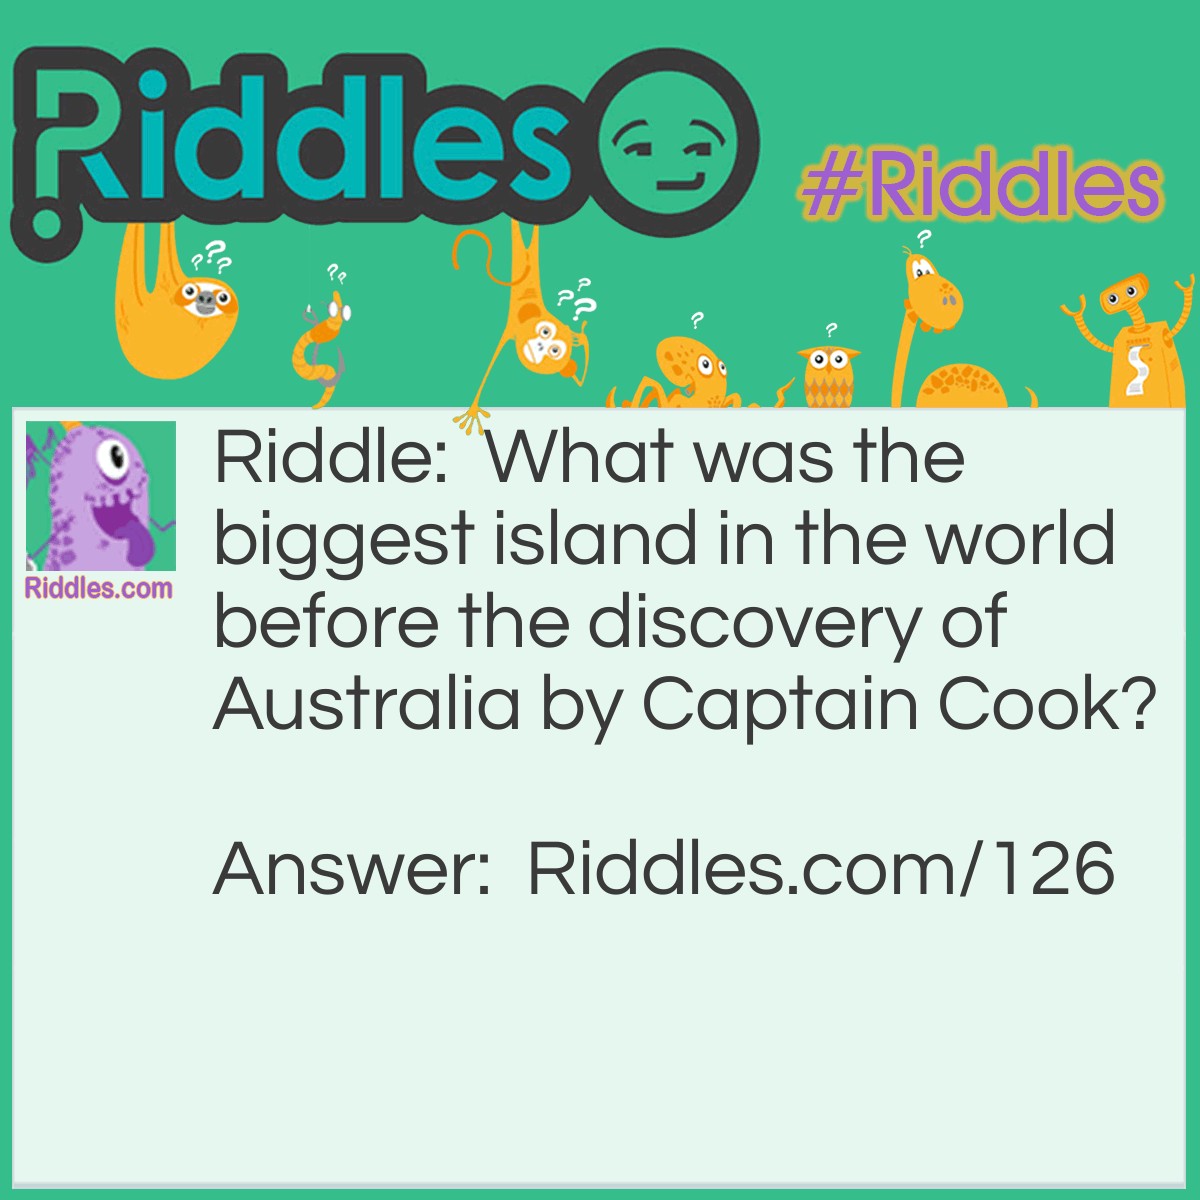 Riddle: What was the biggest island in the world before the discovery of Australia by Captain Cook? Answer: Australia was always the biggest island in the world, even before it was discovered.